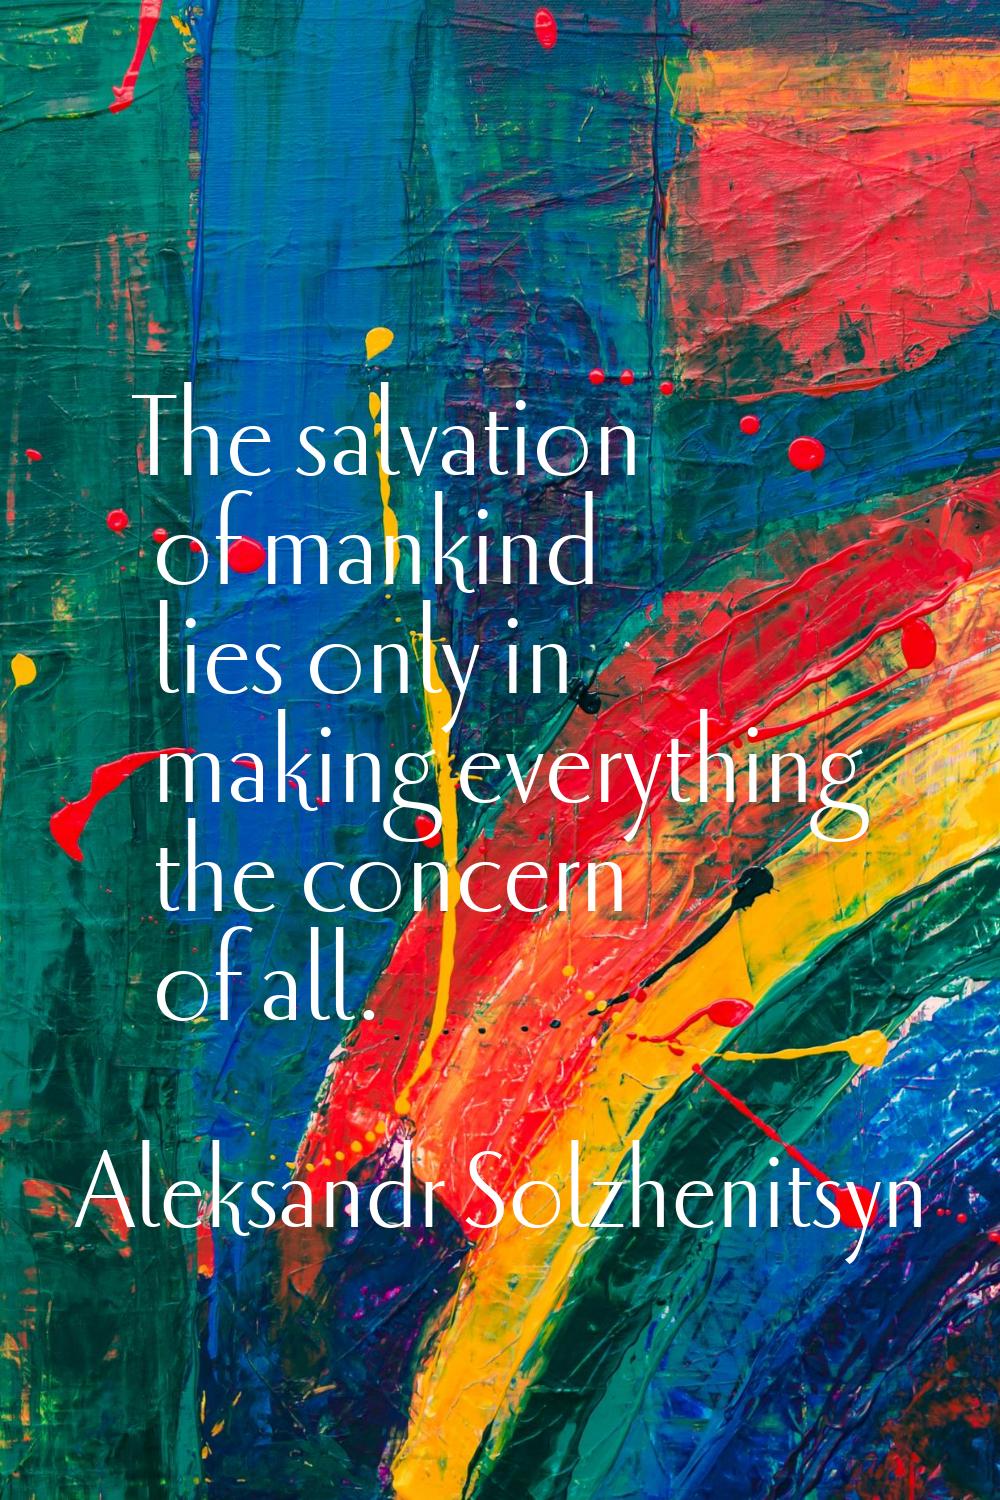 The salvation of mankind lies only in making everything the concern of all.